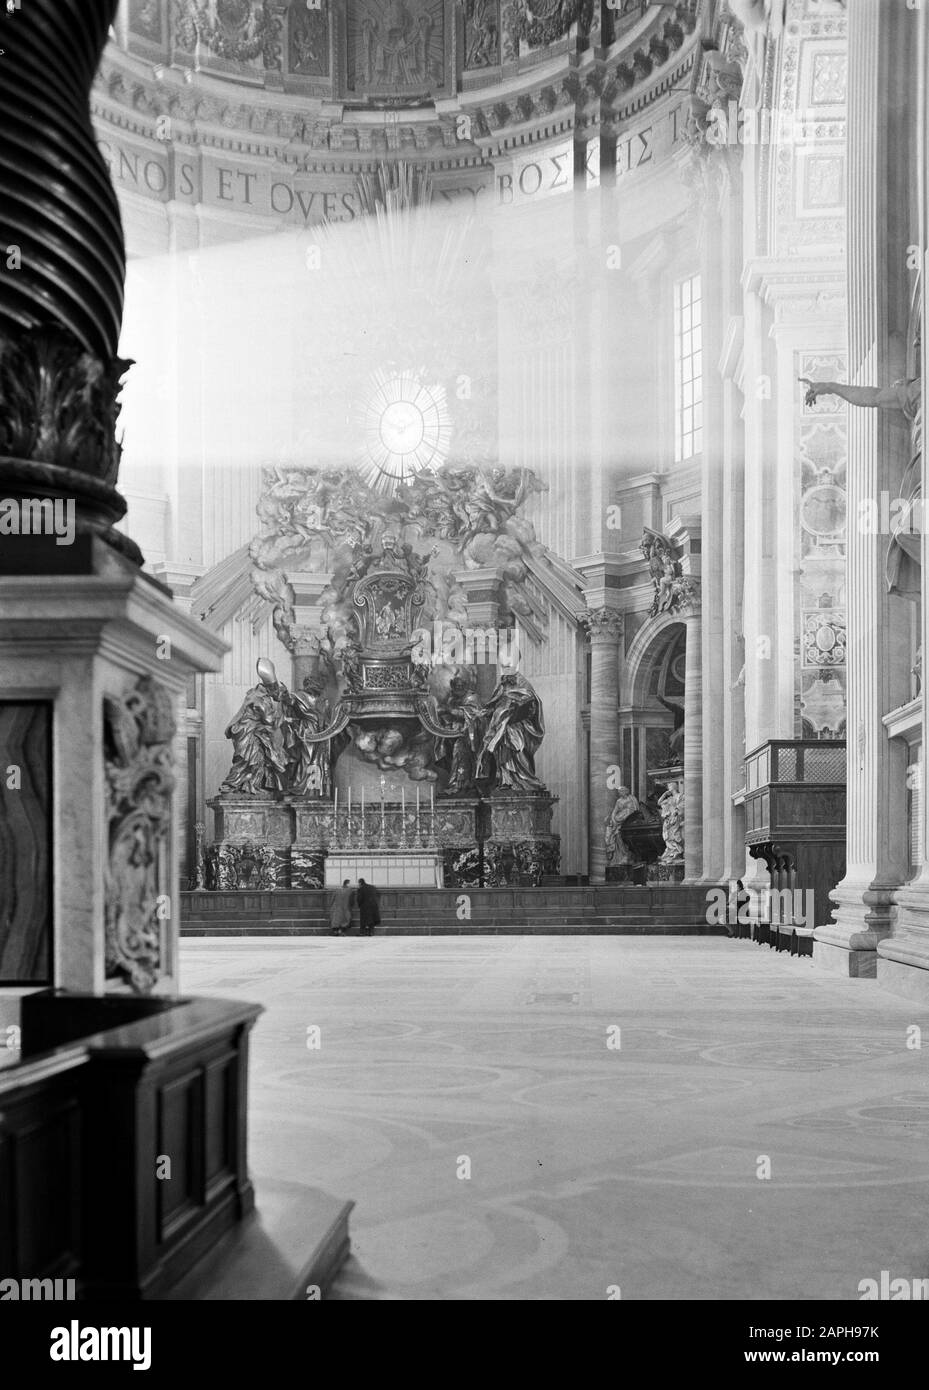 Rome: Visit to Vatican City Description: The Cathedra Petri designed by Bernini in the abse of St. Peter's Basilica Date: December 1937 Location: Italy, Rome, Vatican City Keywords: architecture, baroque, etc. sculpture, interior, church buildings Institution name: Sint Pieter Stock Photo